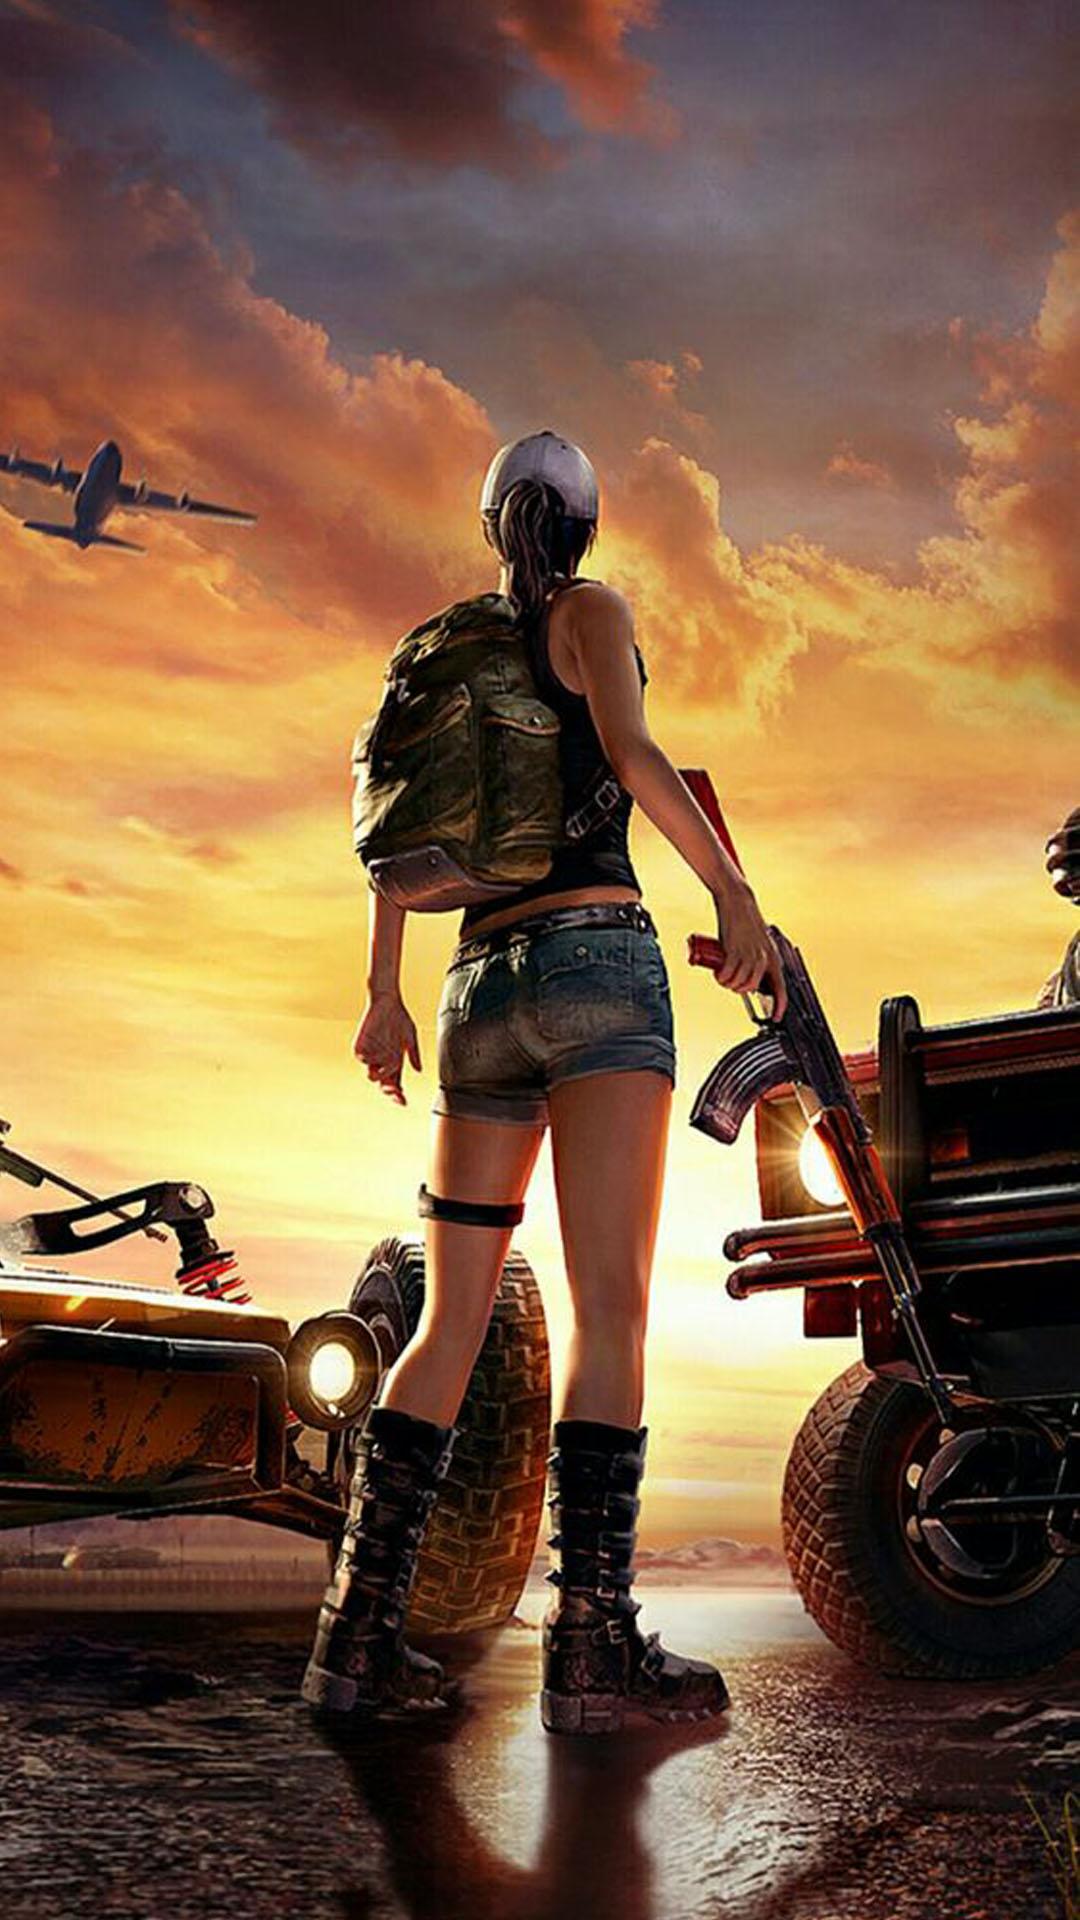 PUBG Mobile Wallpapers 4k for mobile fÃ¼r Android - APK ... - 